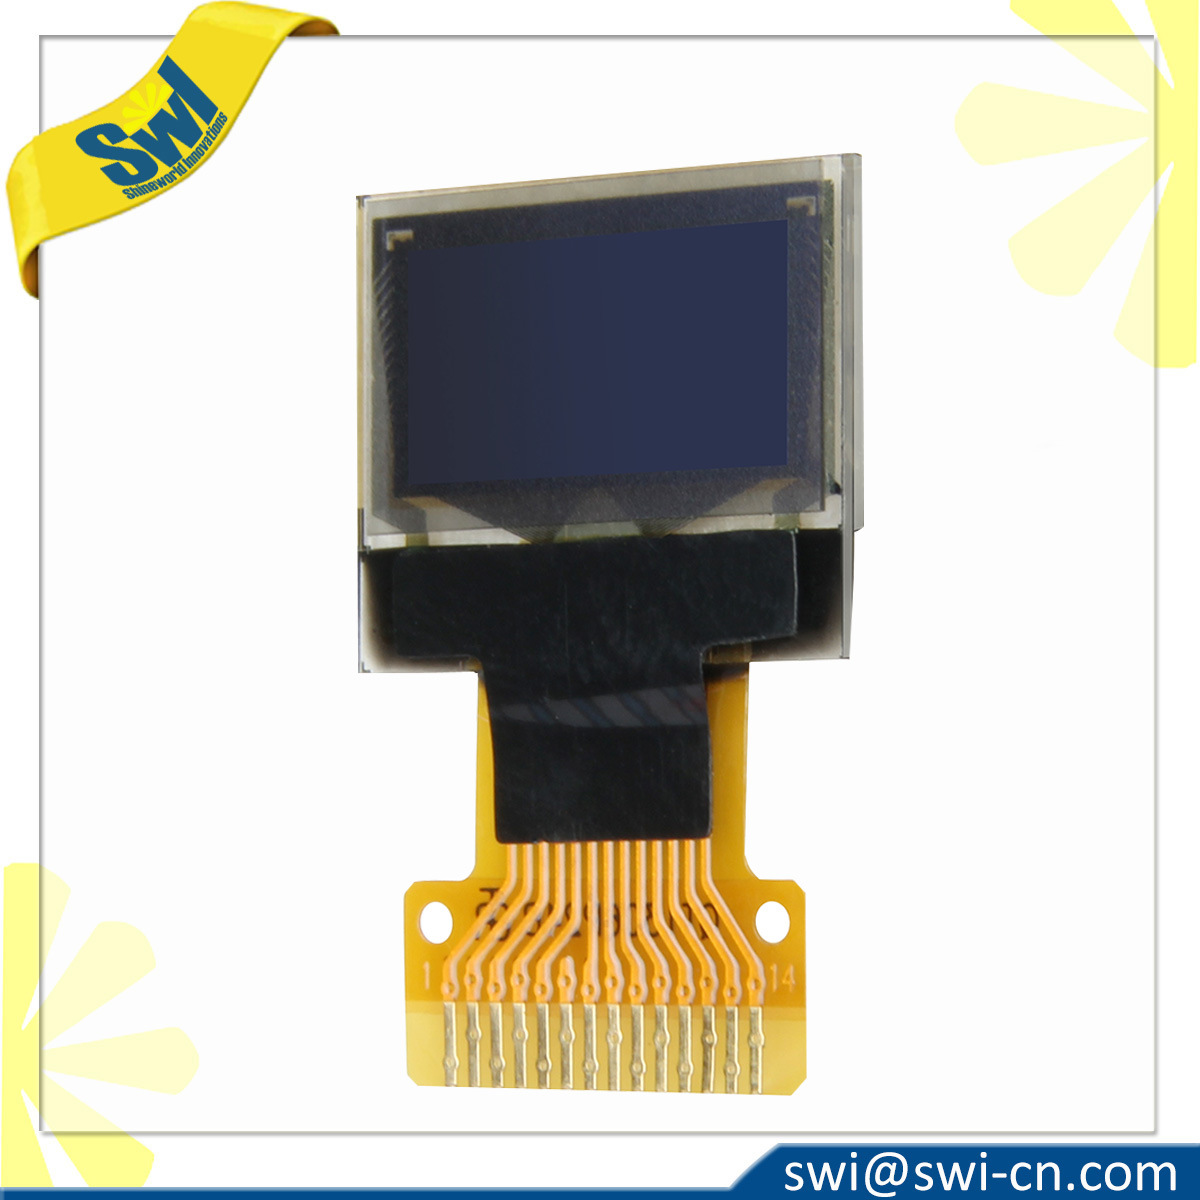 0.49 Inch LCD Display Panel Flexible OLED Display for Smart Home